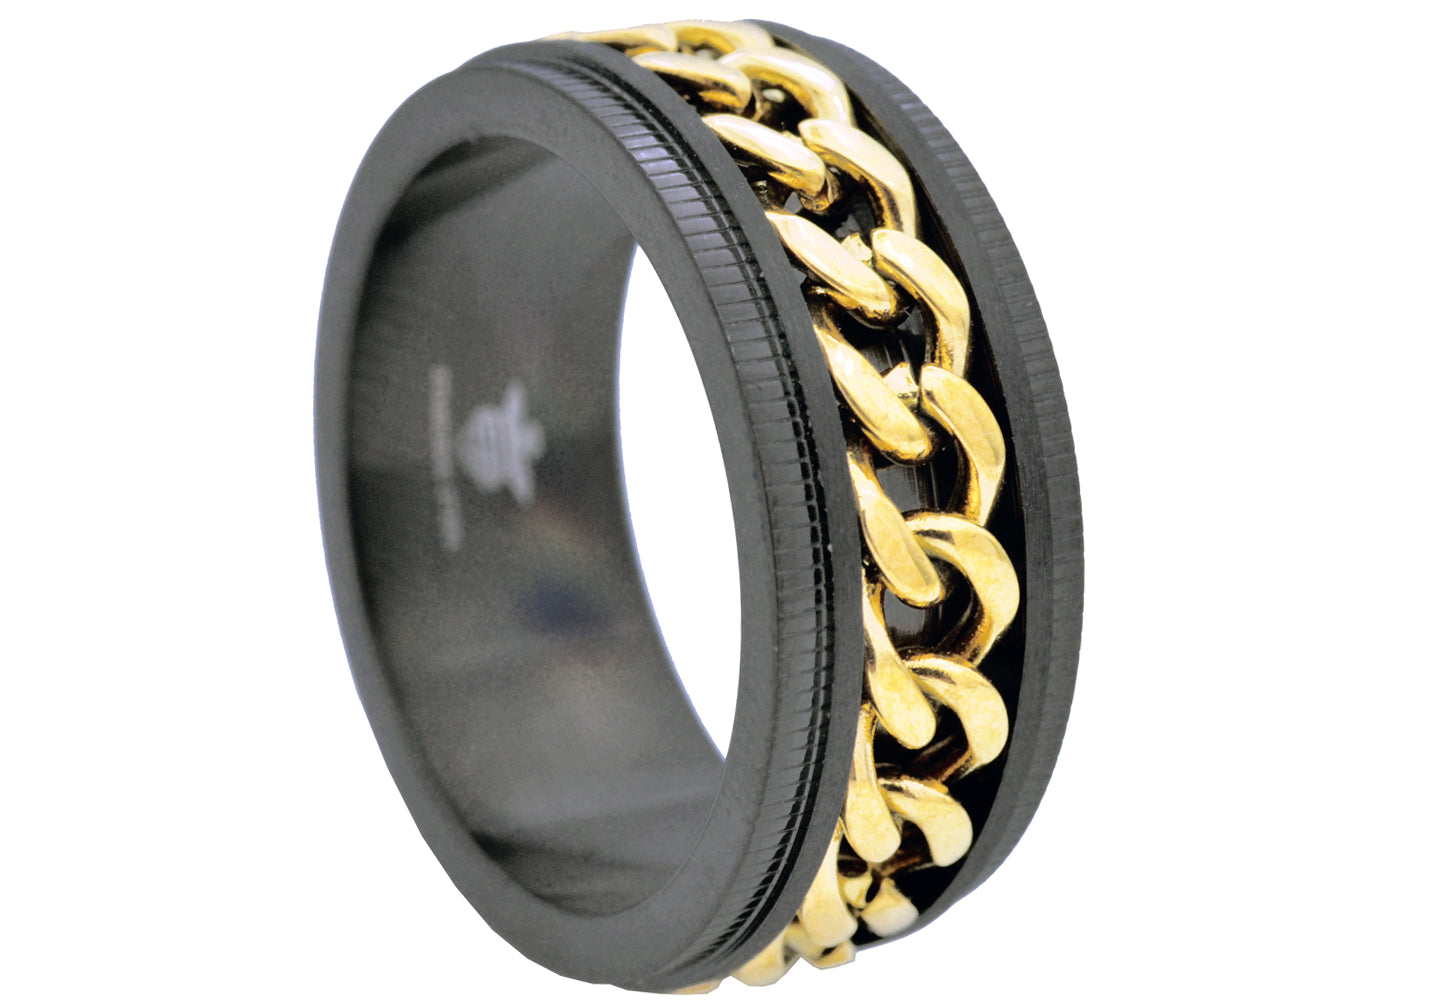 Stainless Steel Double Rotatable Chain Self Defence Ring Hip Hop Fashion  Jewelry For Men And Women By Will And Sandy From Shanshan123456, $0.89 |  DHgate.Com